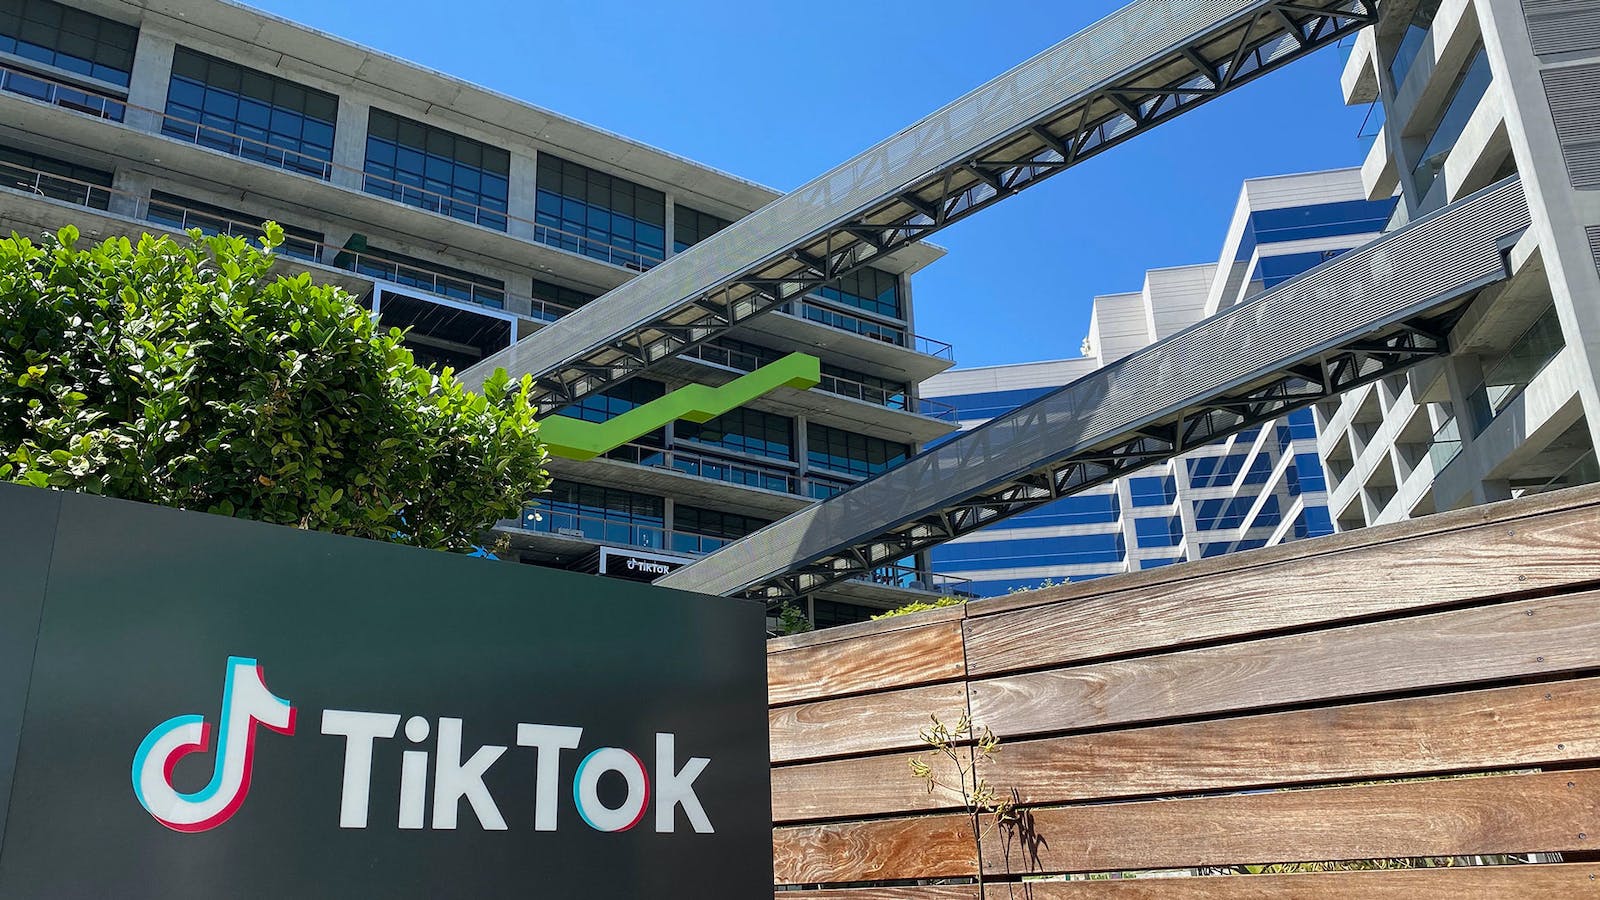 The Difficulties of Curtailing TikTok's Global Influence